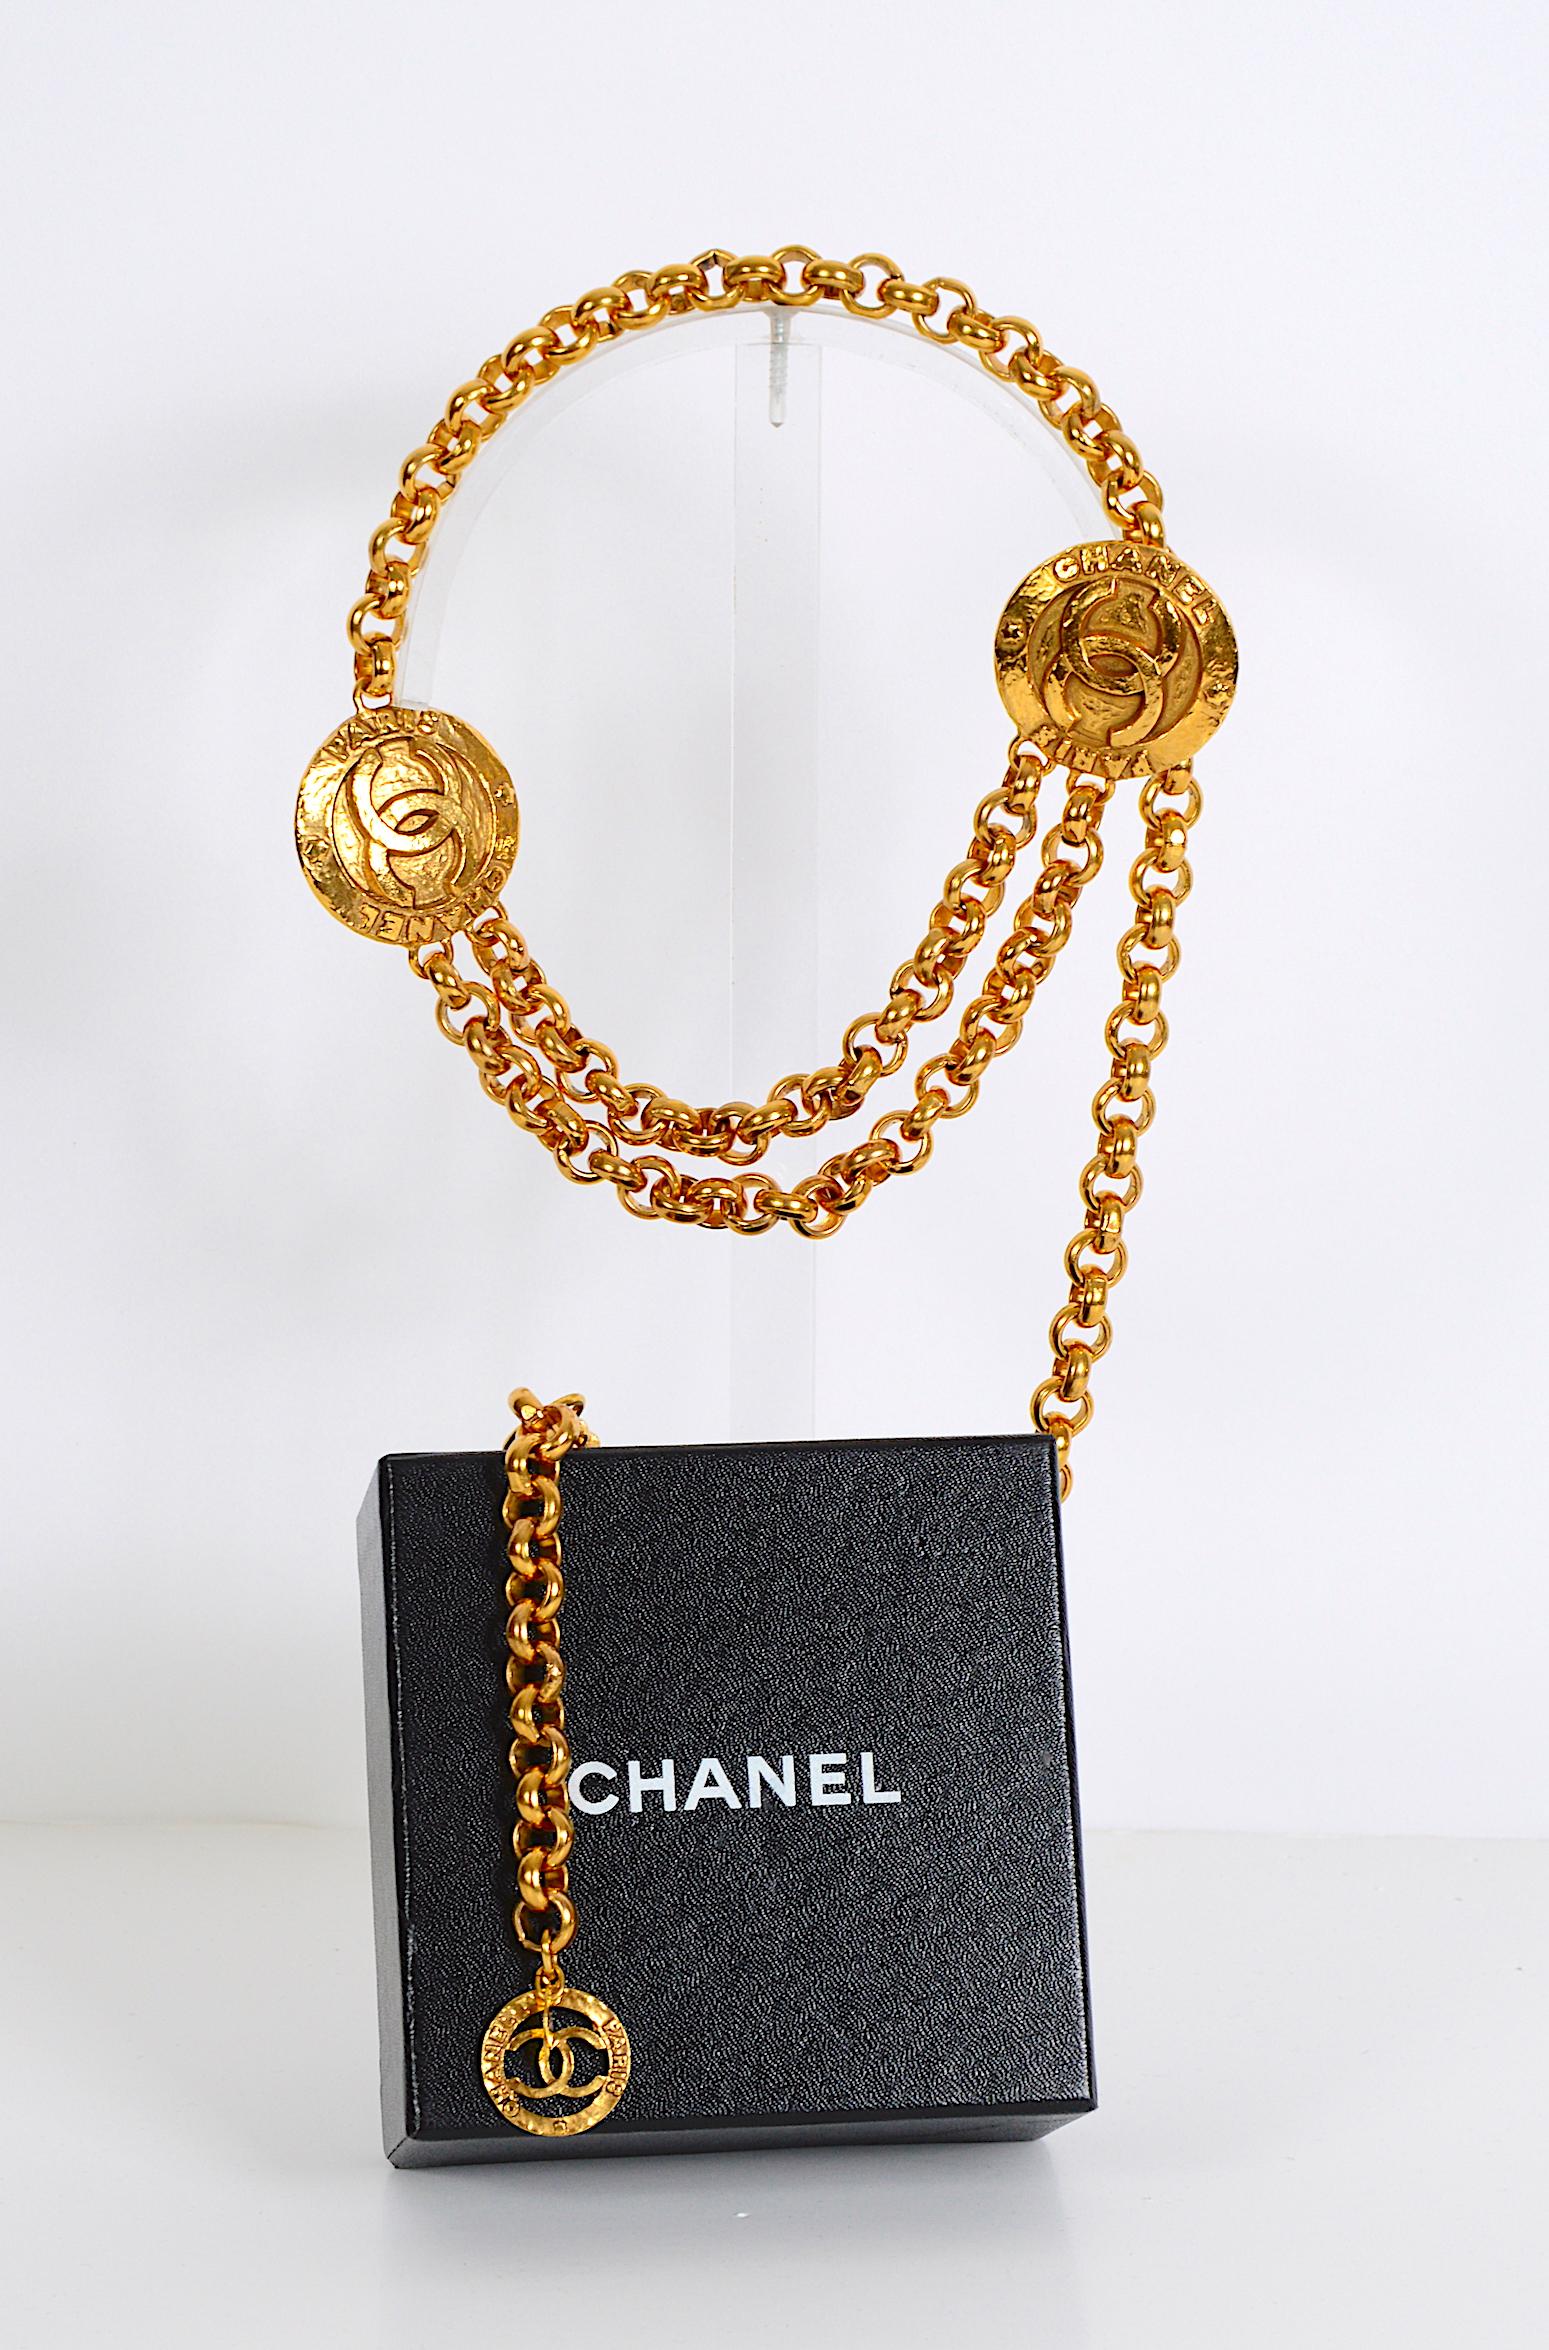 
Authentic Chanel chain belt in Goldtone. It can fit smaller sizes since the hook can be attached to any place on the chain. Chanel 2 CC 8 Made in France 6120 engraved on the medallion hook.
Total length chain 33inches/84cm. 
In fabulous vintage